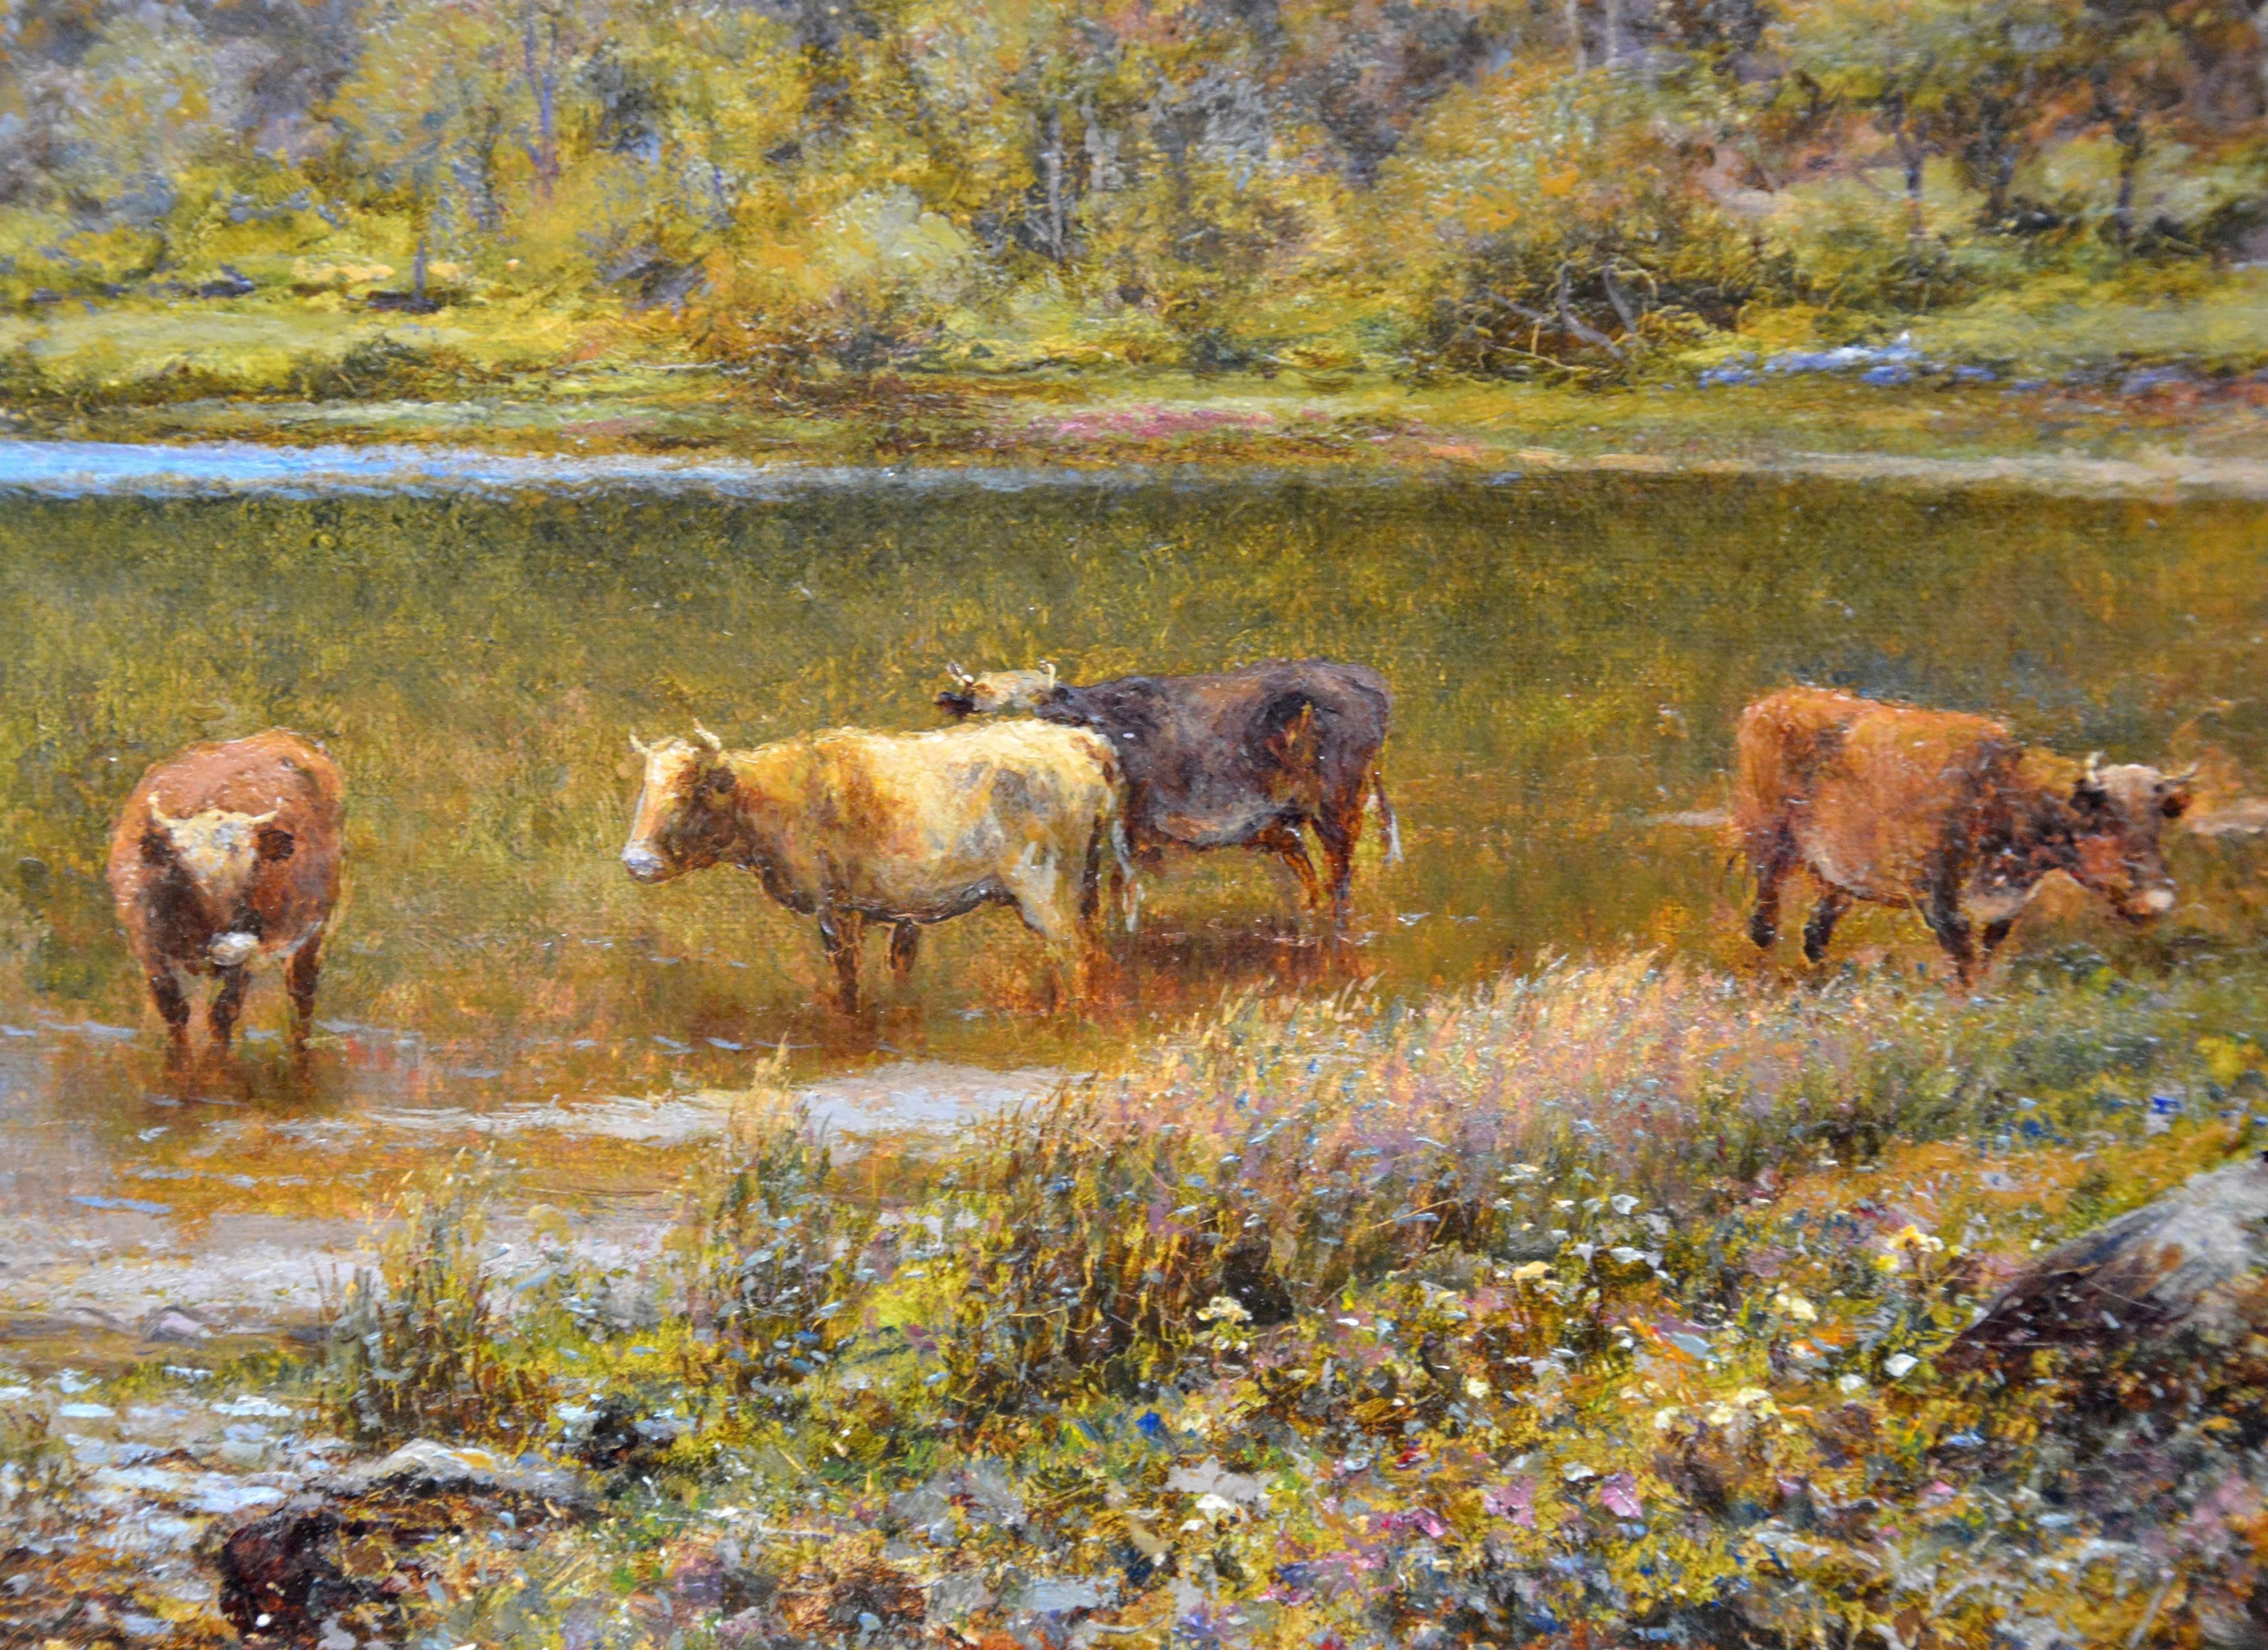 Scottish Landscape with Highland Cattle - 19th Century Oil Painting - Glendening 1